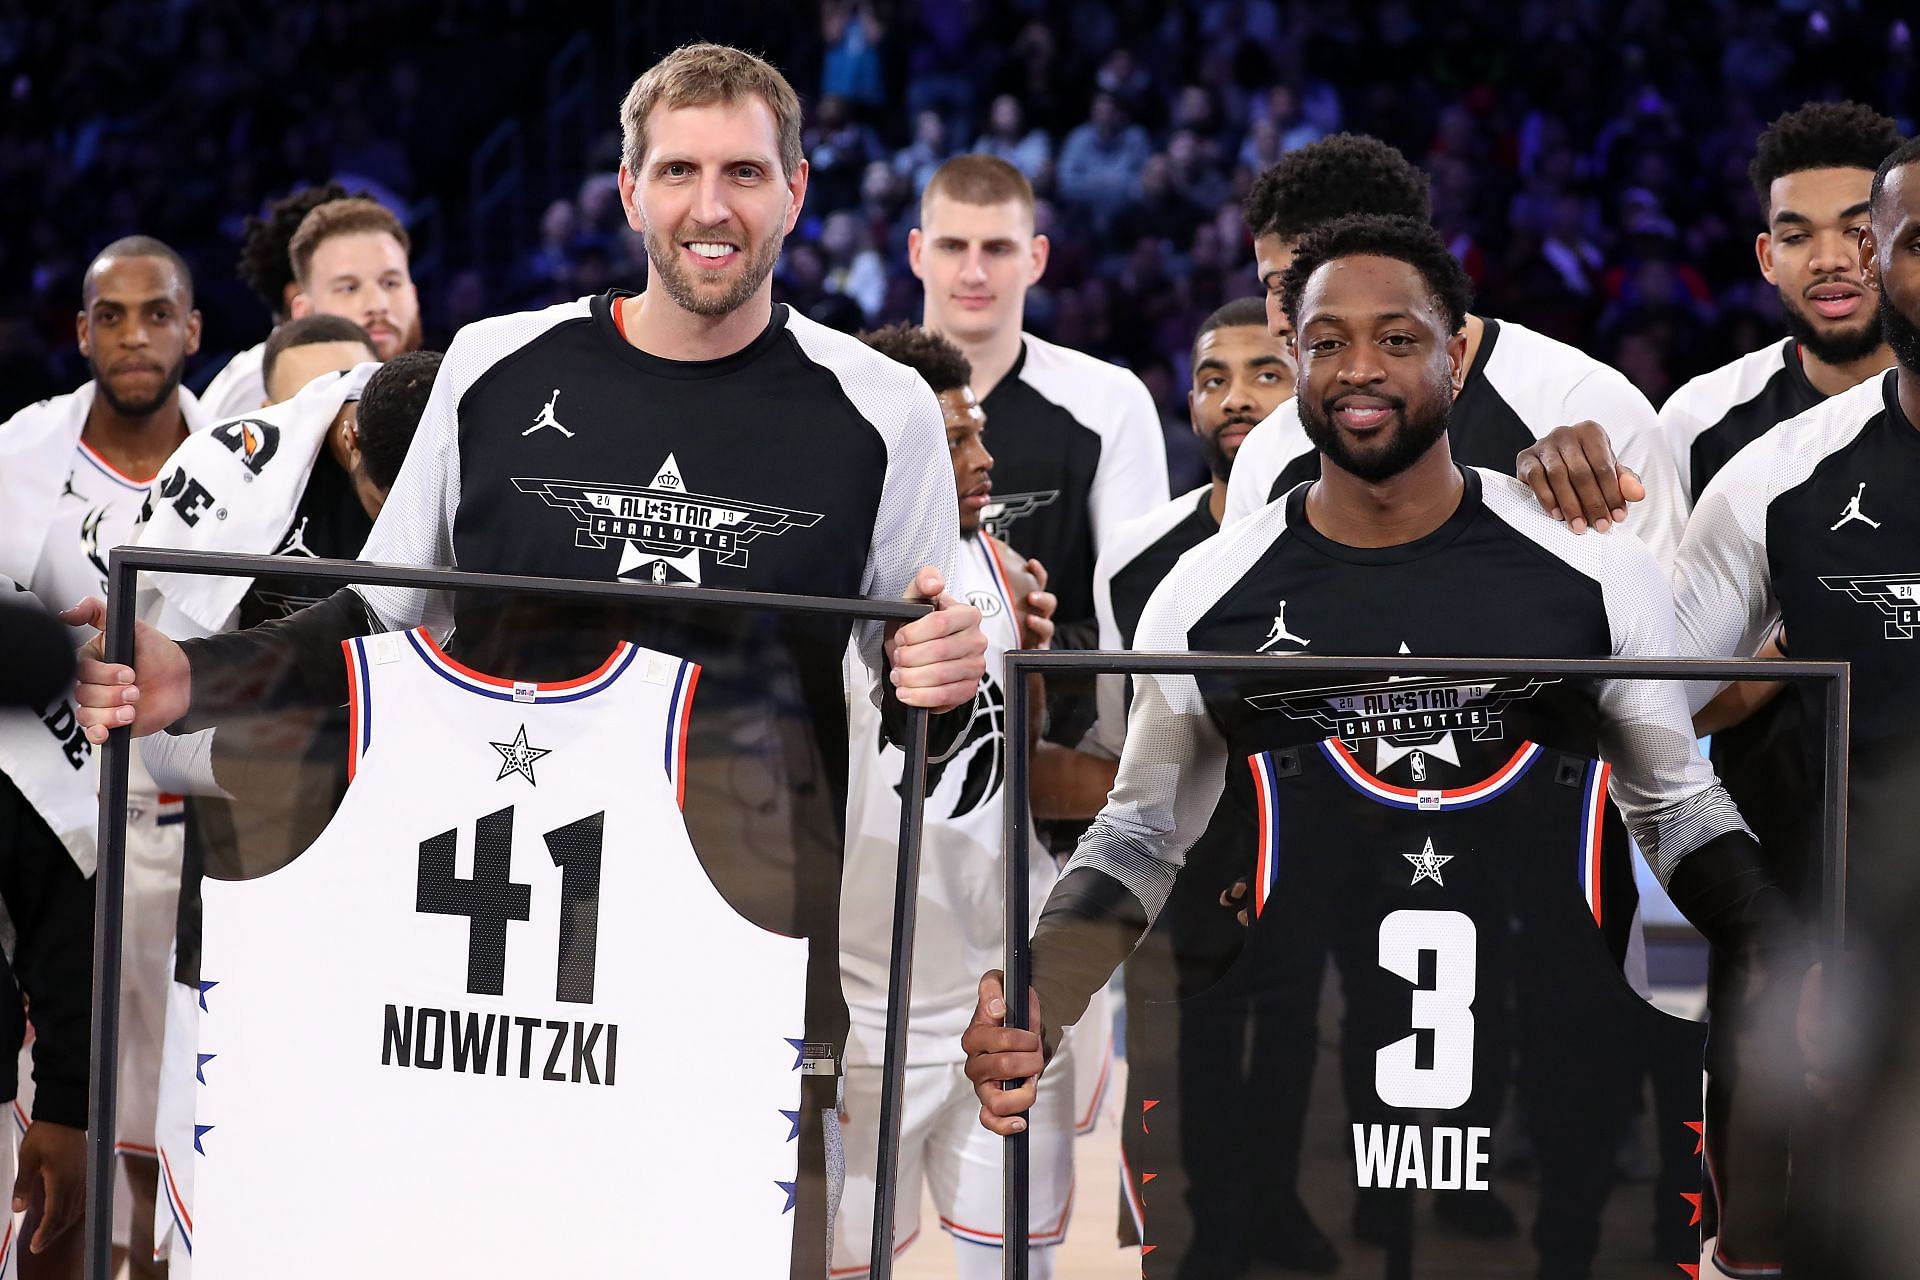 Nowitzki was also a special addition to the All-Star team (image via Getty Images)